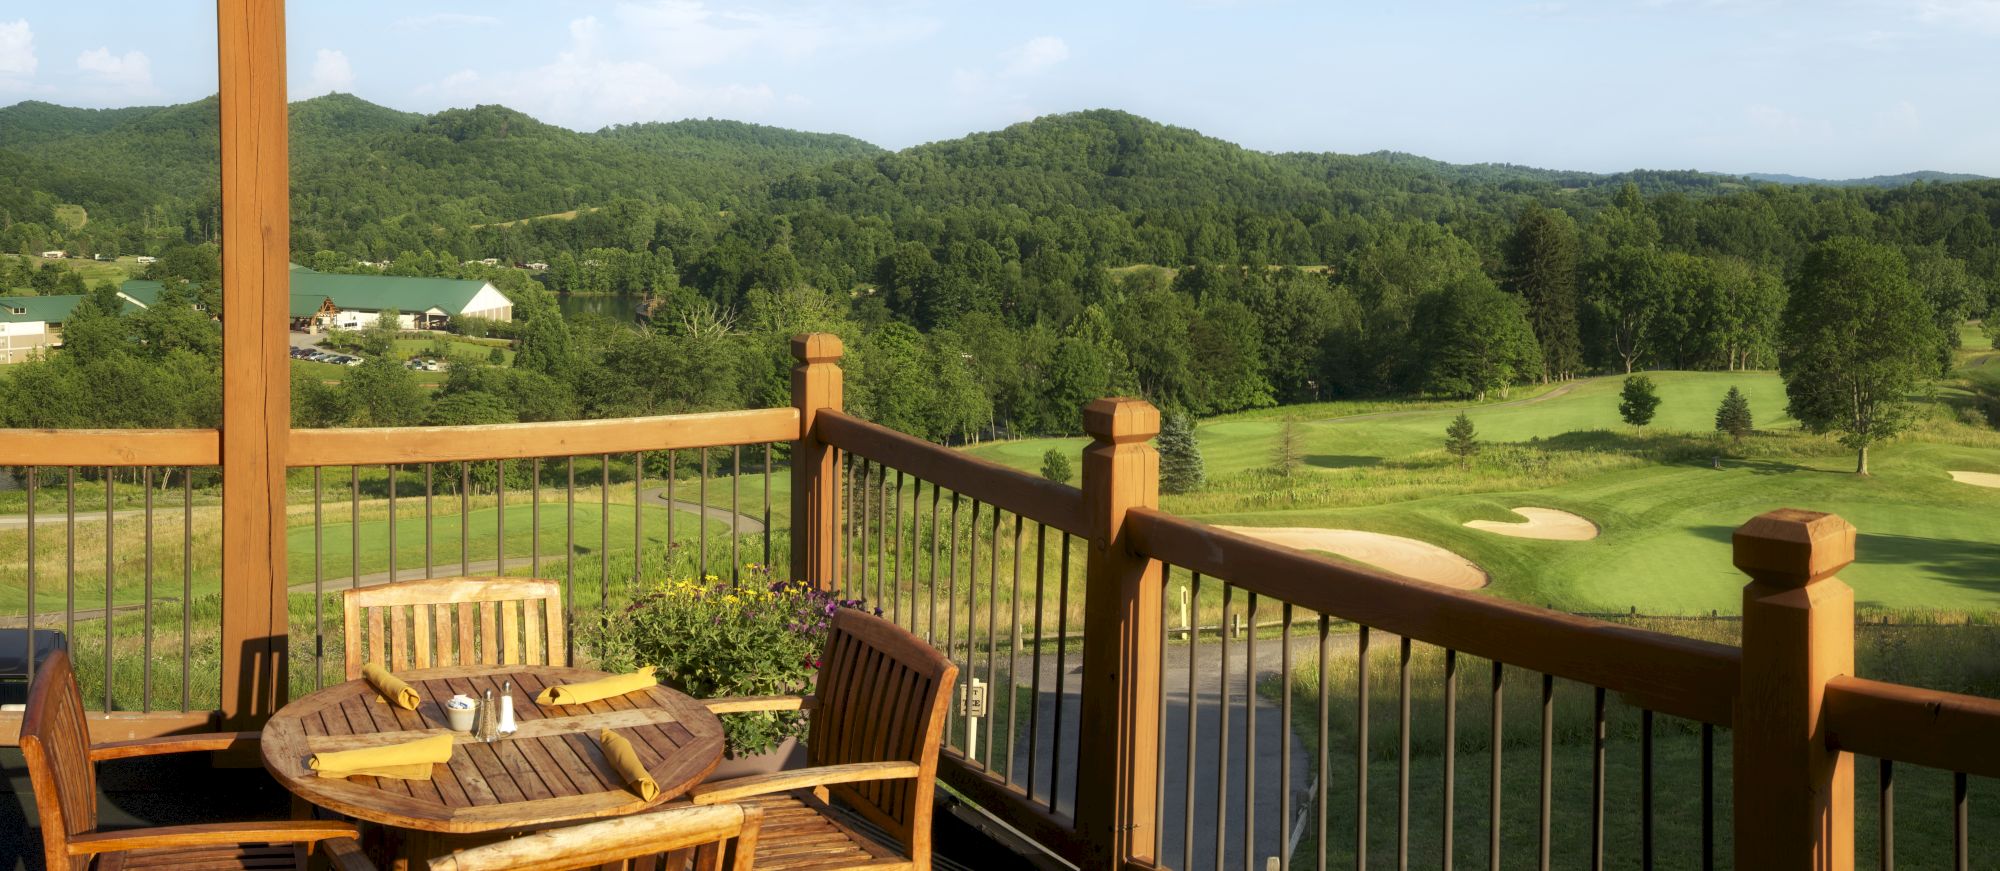 Wooden patio overlooking a golf course and a landscape of rolling green hills under a clear sky, ending the sentence.